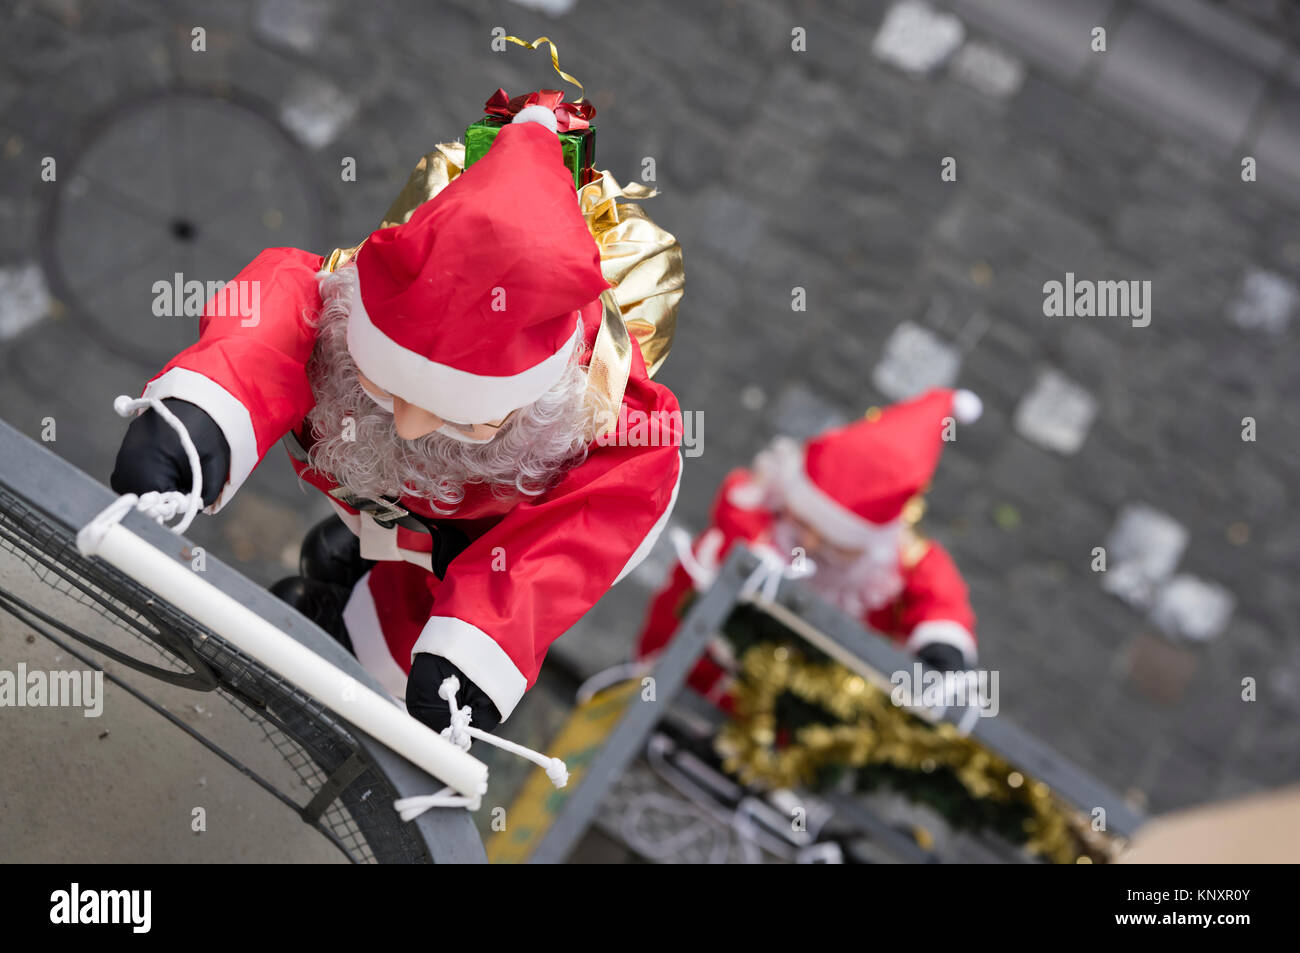 Lucerne, Switzerland - 3 Dec 2017: As Christmas decorations, a rope team of Santa Claus puppets is climbing up the facade of a house at Lucerne, Switz Stock Photo